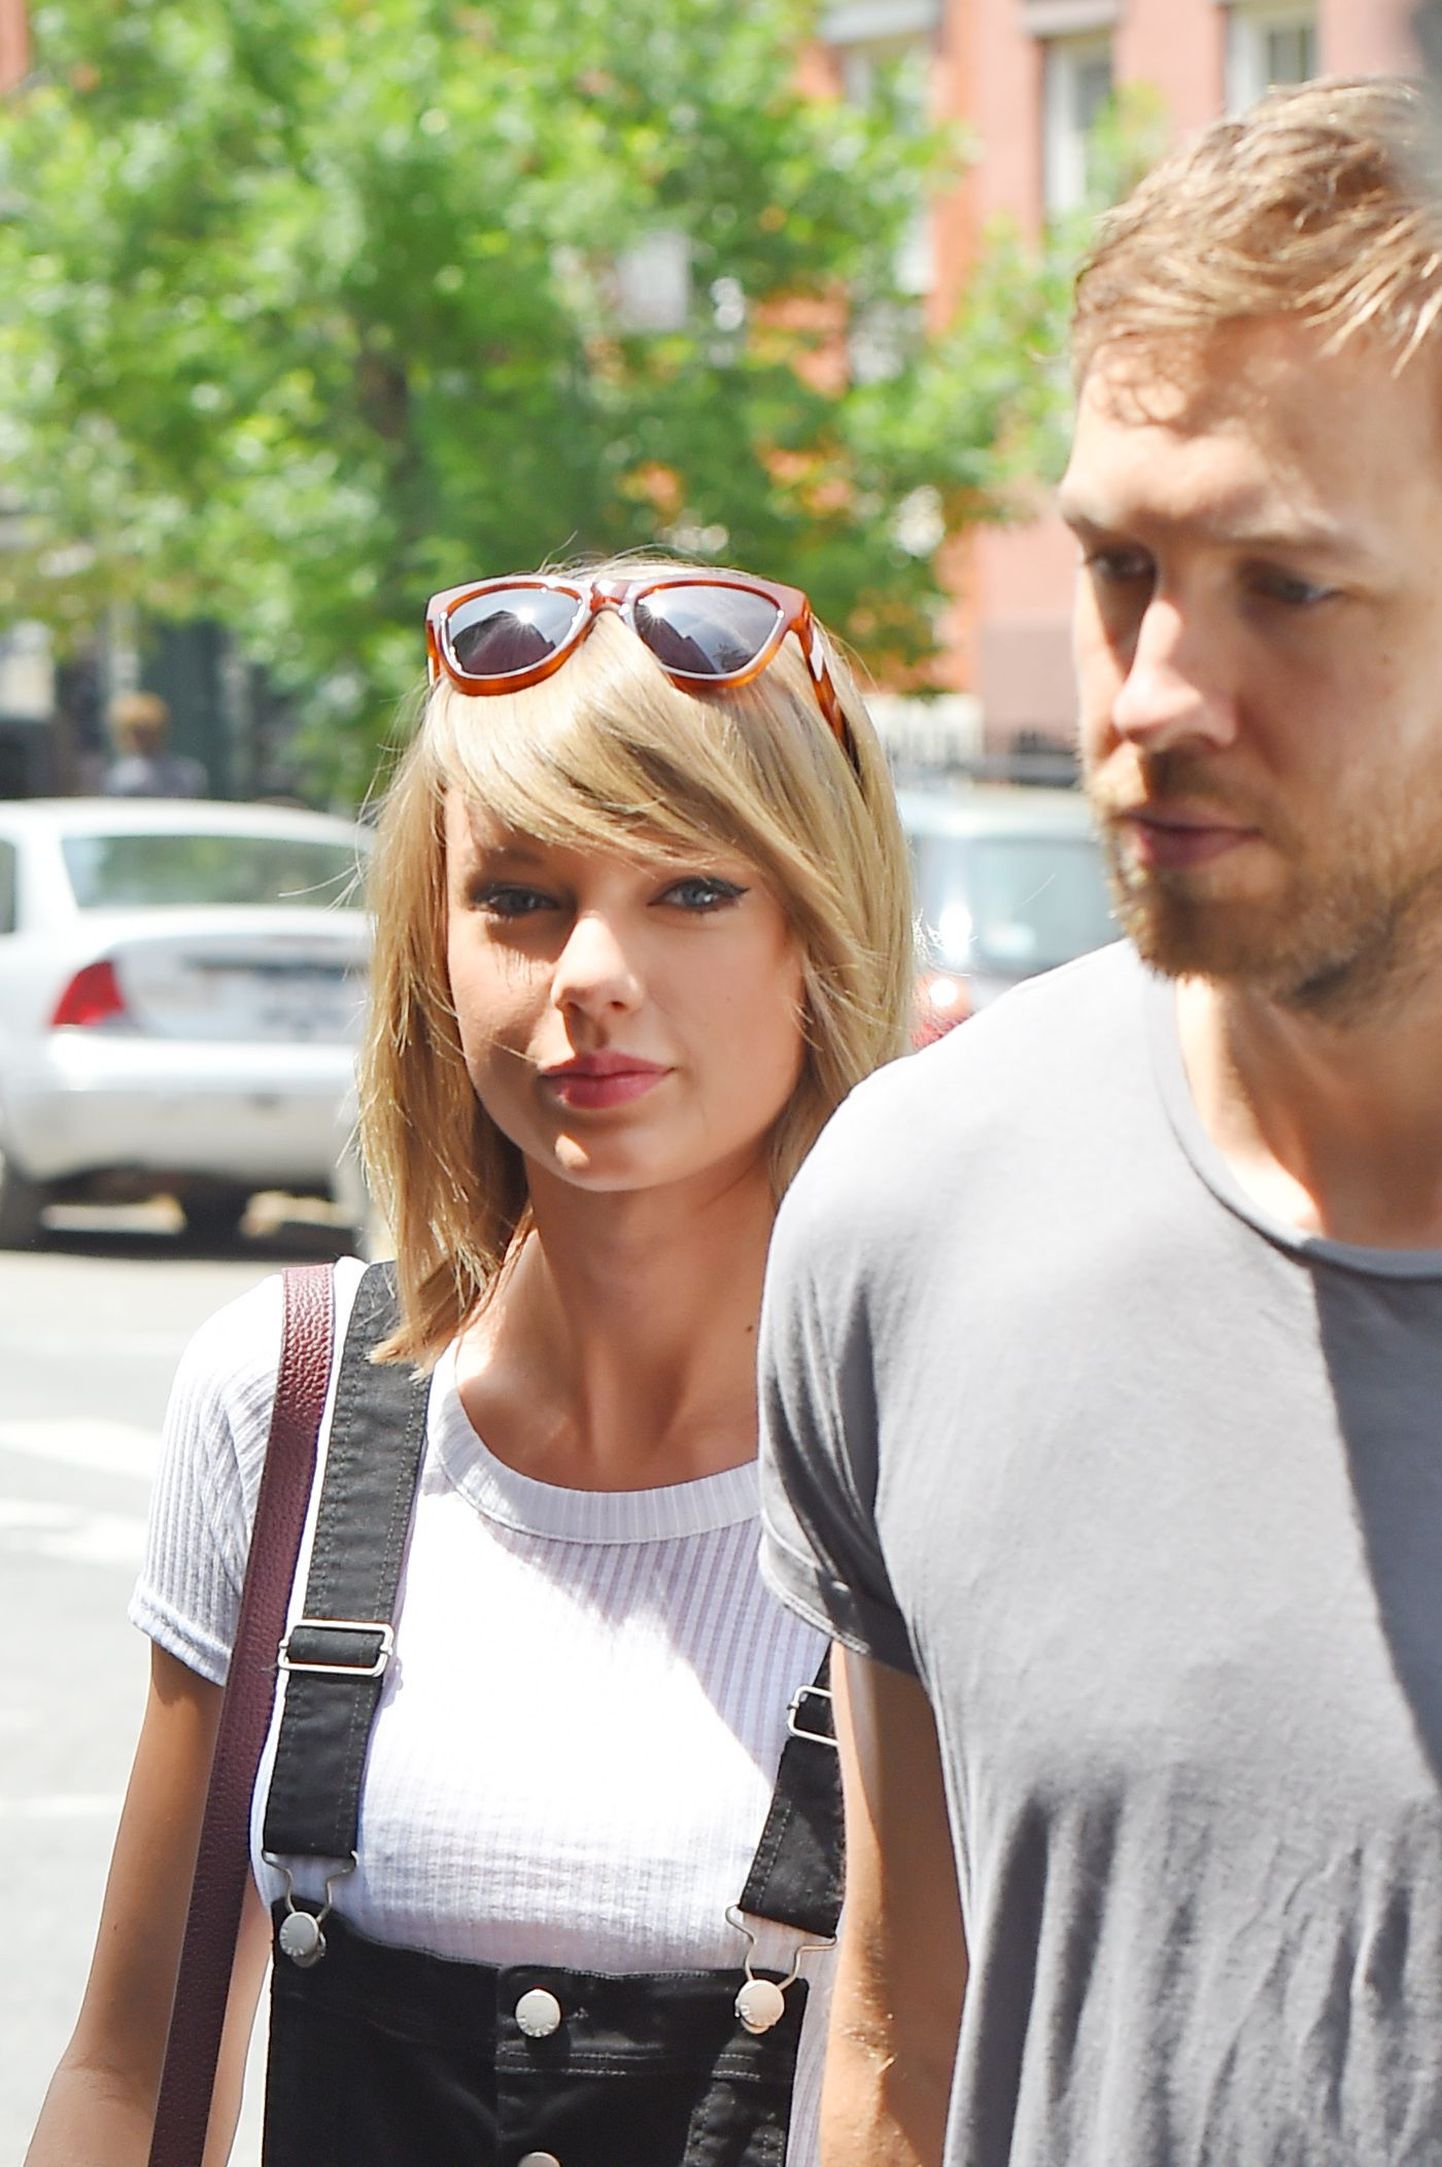 MANHATTAN, NY - MAY 28, 2015: Taylor Swift and Calvin Harris get lunch at the Spotted Pig with Ed Sheeran on MAY 28, 2015 in New York
(Photo By Josiah KamauBuzzFoto.com)

Buzz Foto LLC 
httpwww.buzzfoto.com 
1112 Montana Ave suite 80 
Santa Monica CA 90403 
1 310 980 8822 
1 310 691 3888  Local Caption  ***  Taylor Swift, Calvin Harris